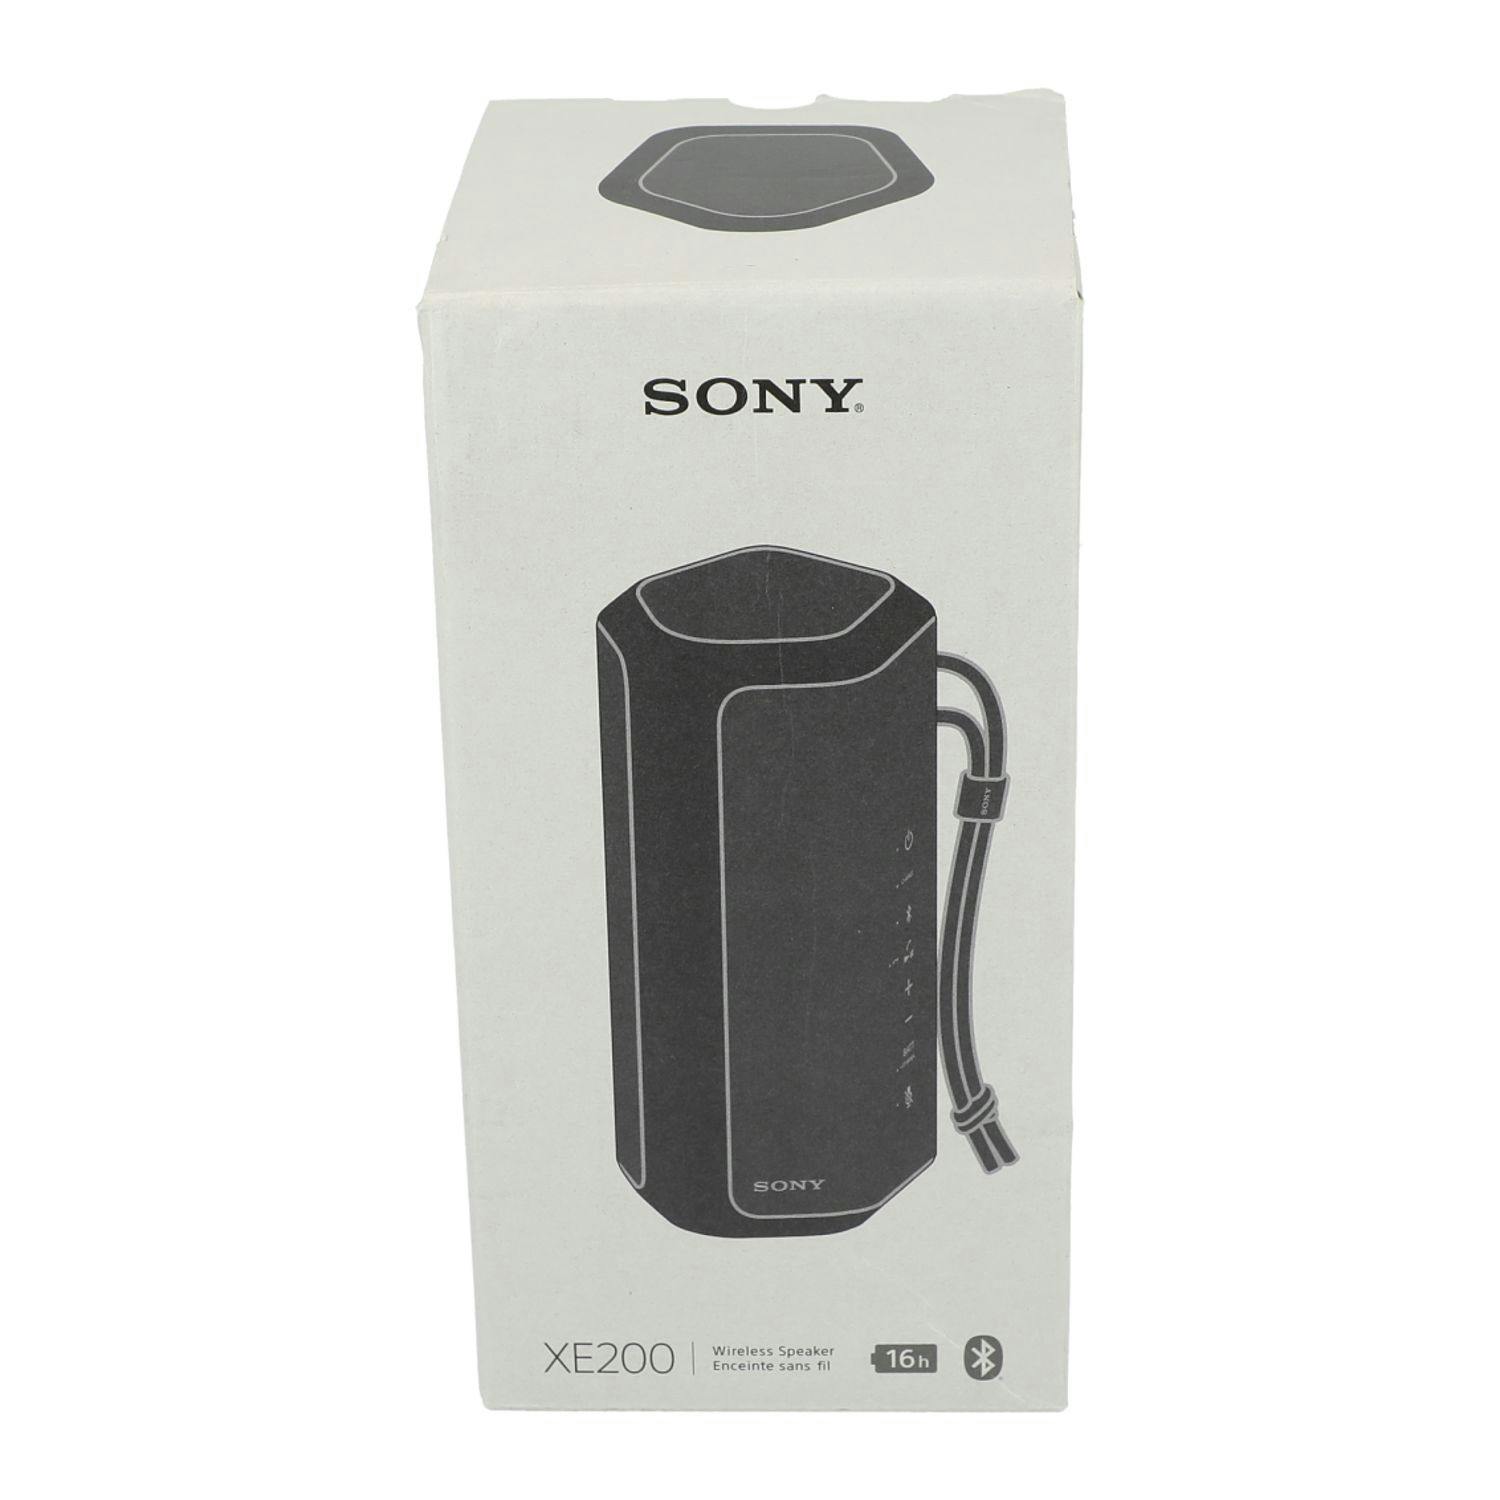 Sony XE200 Bluetooth Speaker - additional Image 4